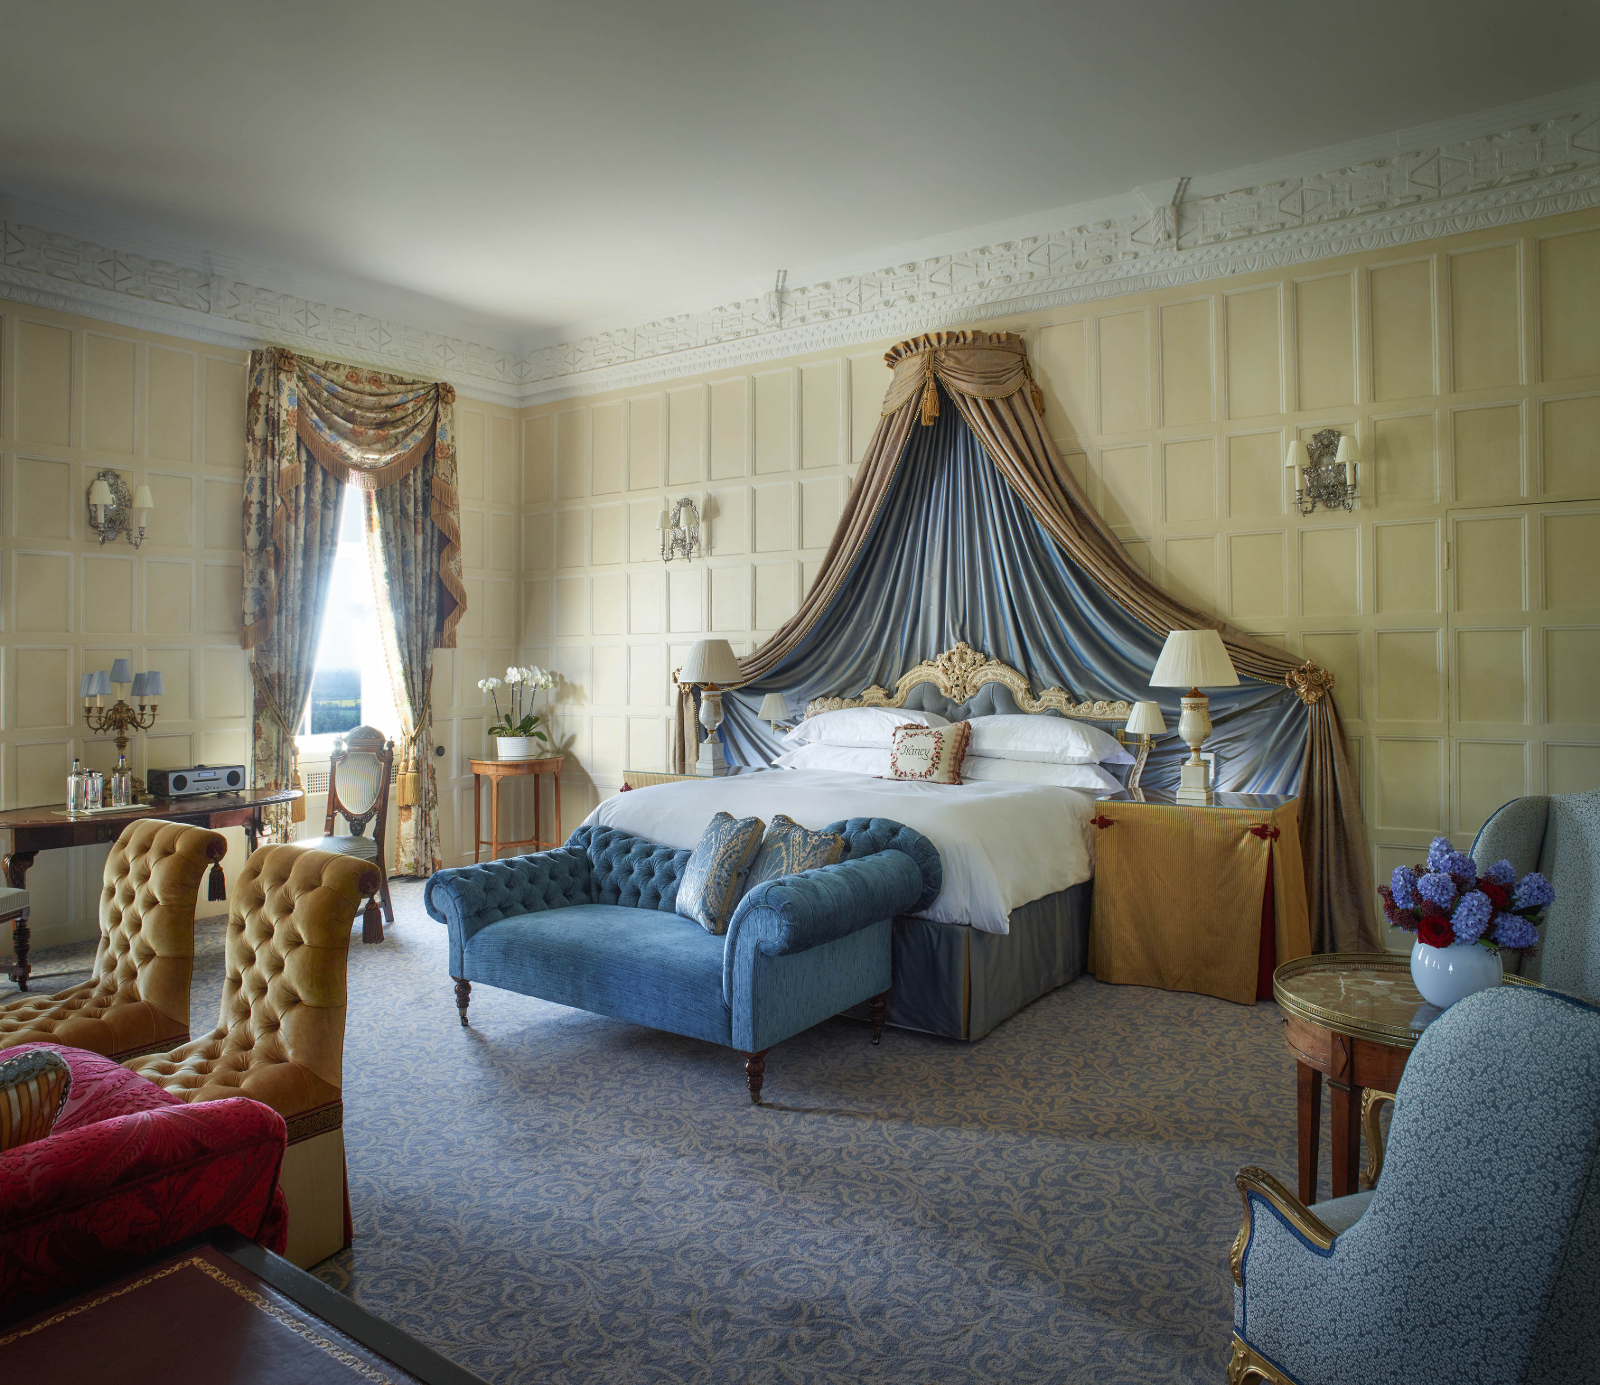 The Lady Astor Suite at Cliveden House in Berkshire UK